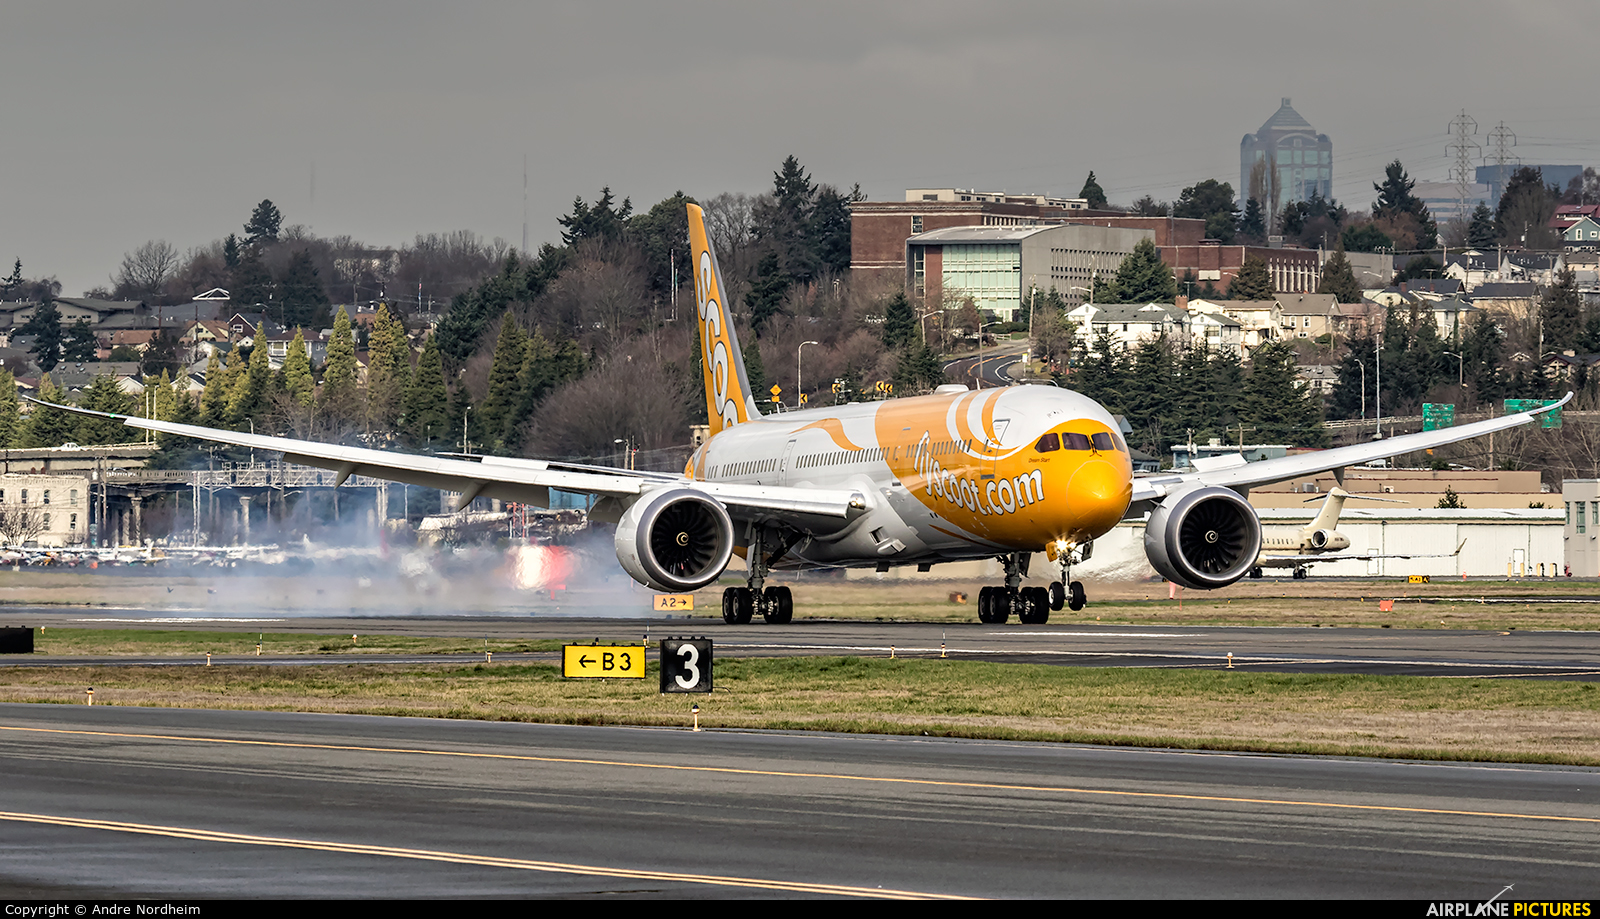 Scoot 9V-OJA aircraft at Seattle - Boeing Field / King County Intl